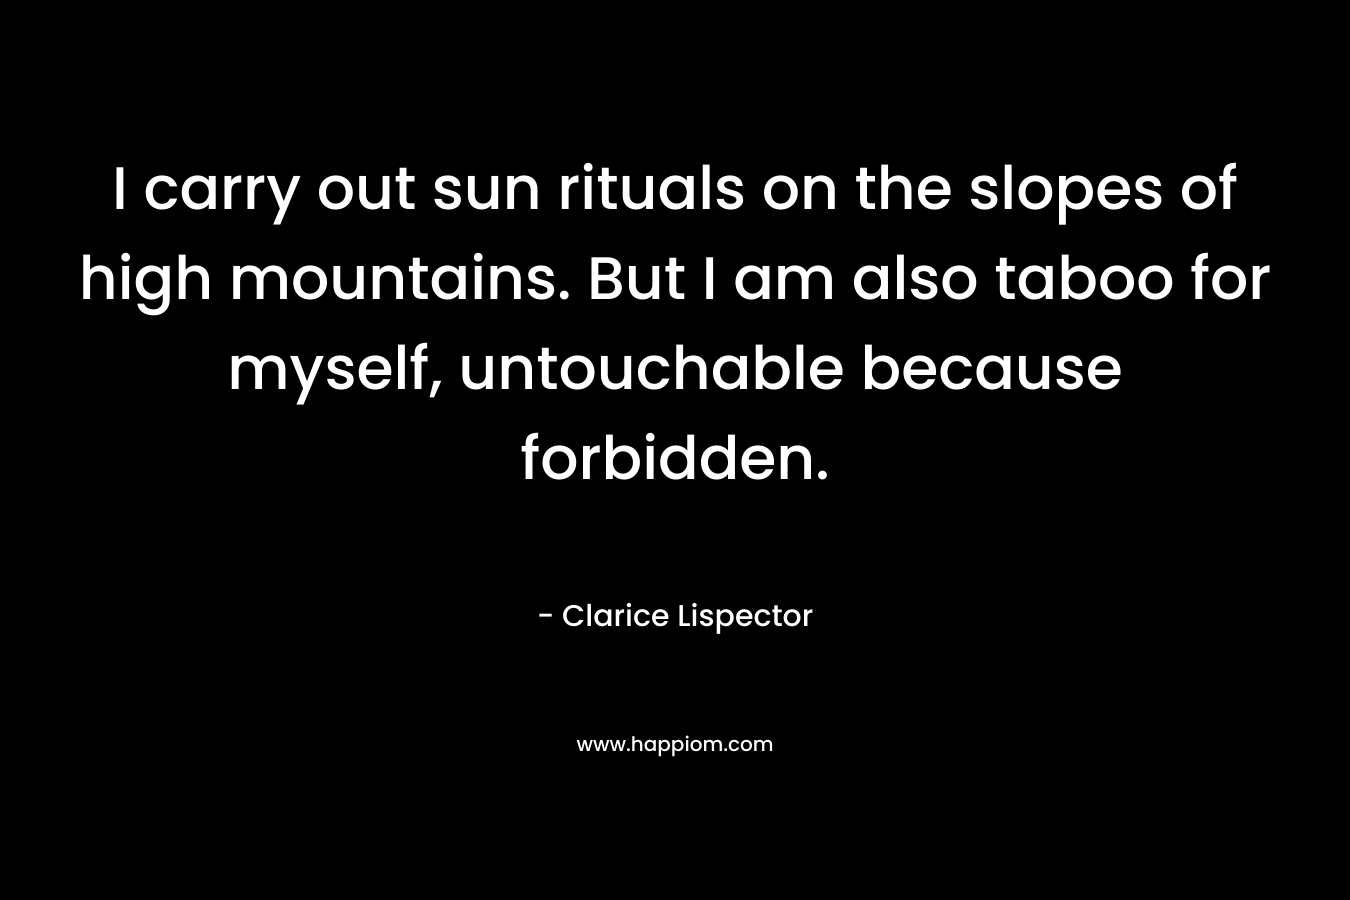 I carry out sun rituals on the slopes of high mountains. But I am also taboo for myself, untouchable because forbidden. – Clarice Lispector